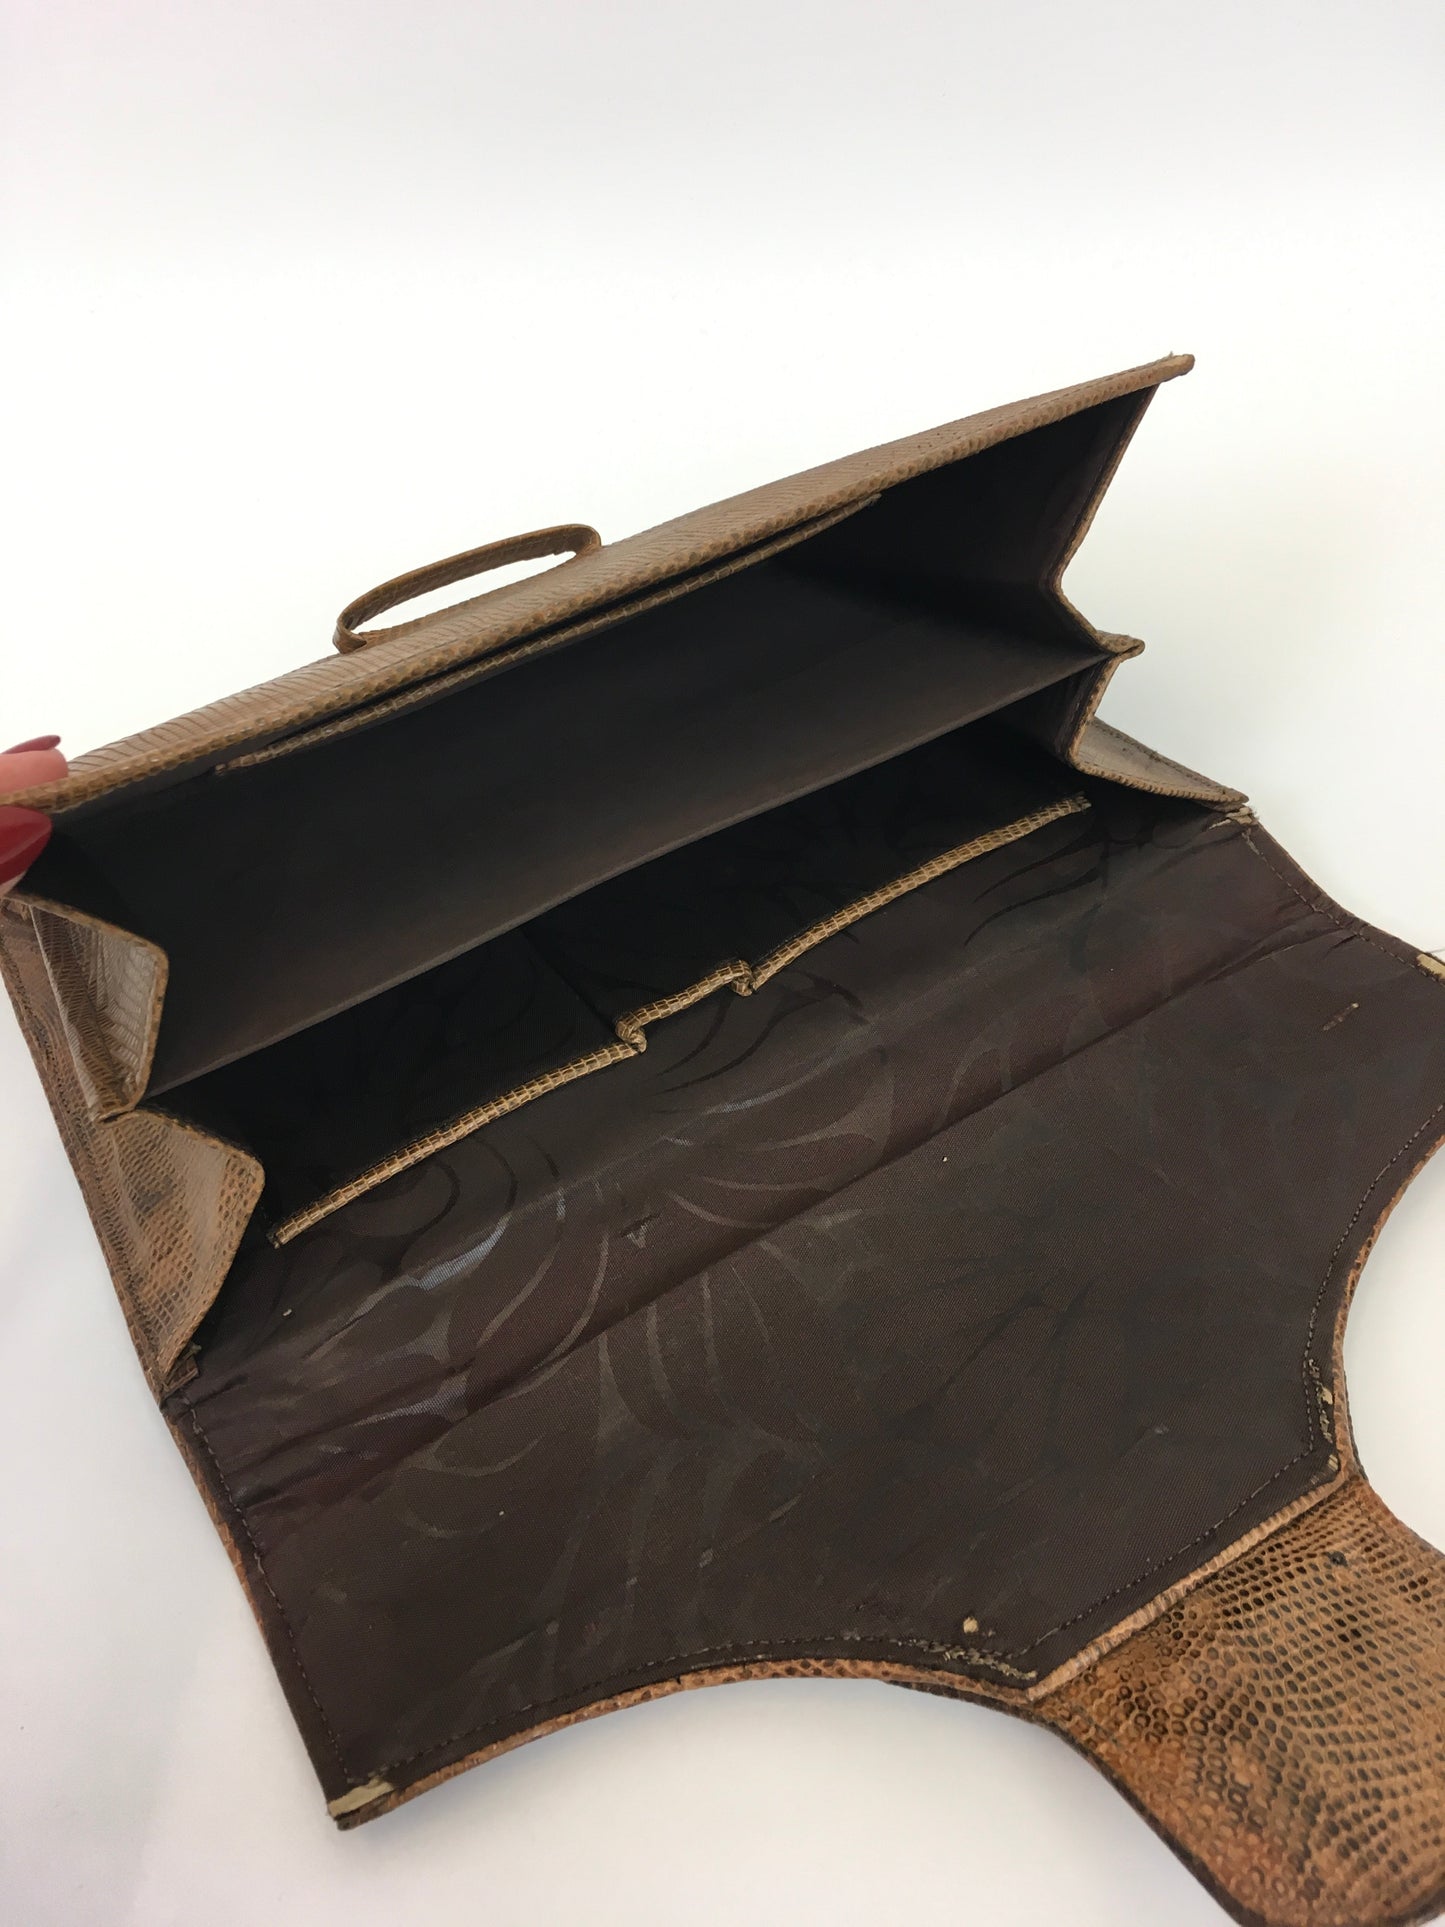 Original 1930’s Skin Envelope Clutch Handbag - With A Lovely Interior and Strong Clasp